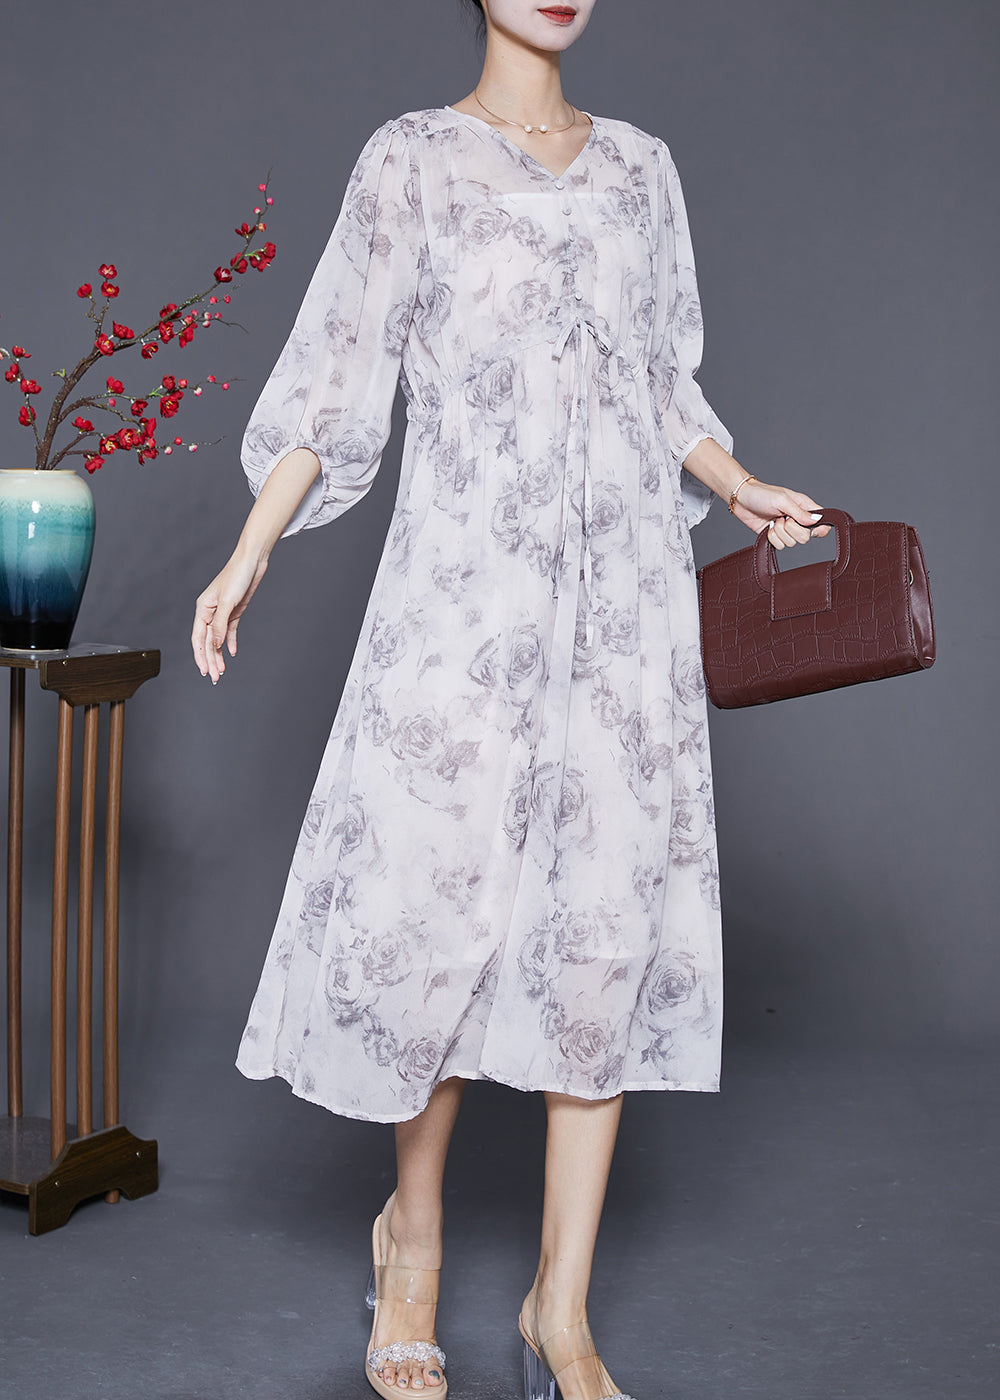 Women White Cinched Rose Print Chiffon Party Dress Summer